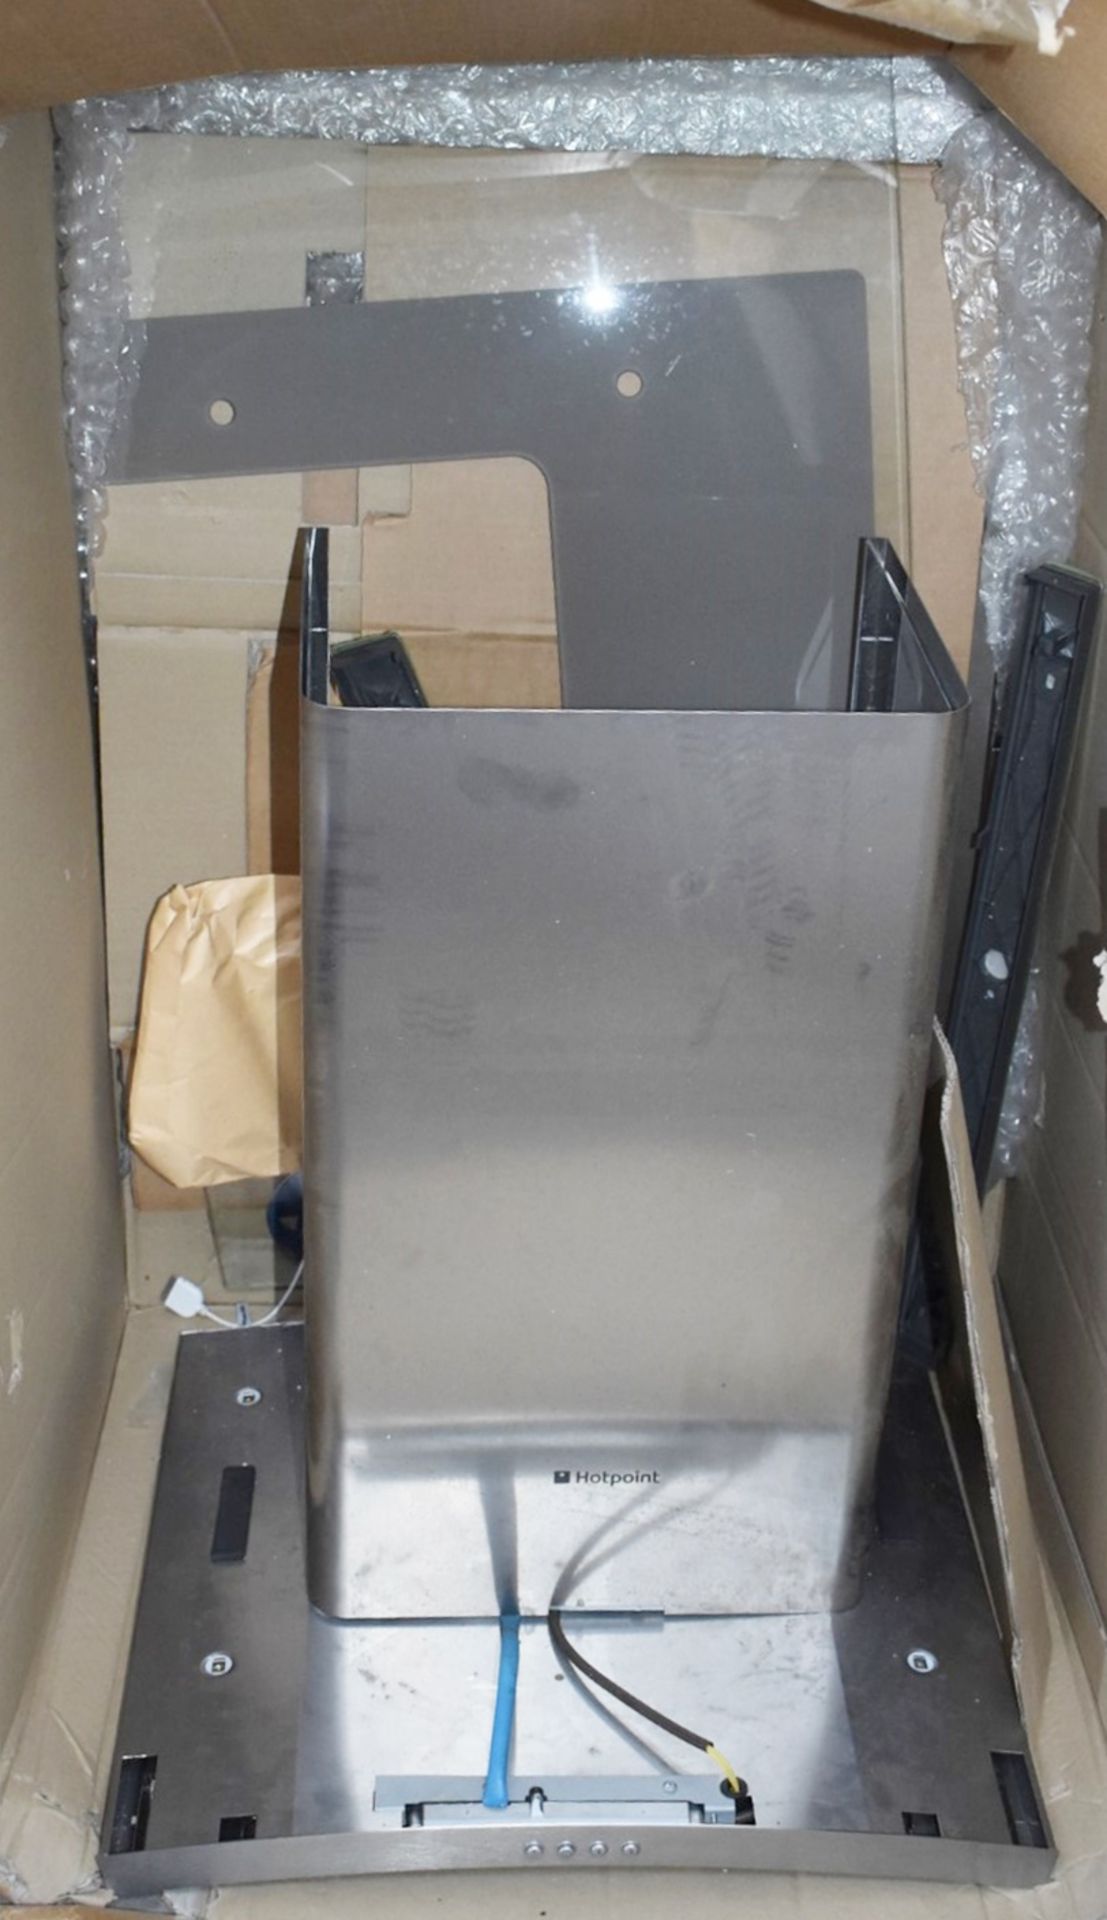 1 x Hot Point 90cm Kitchen Extractor Hood - Model HTC92X - Unused - CL011 - Ref BLT491 - Location: - Image 2 of 8